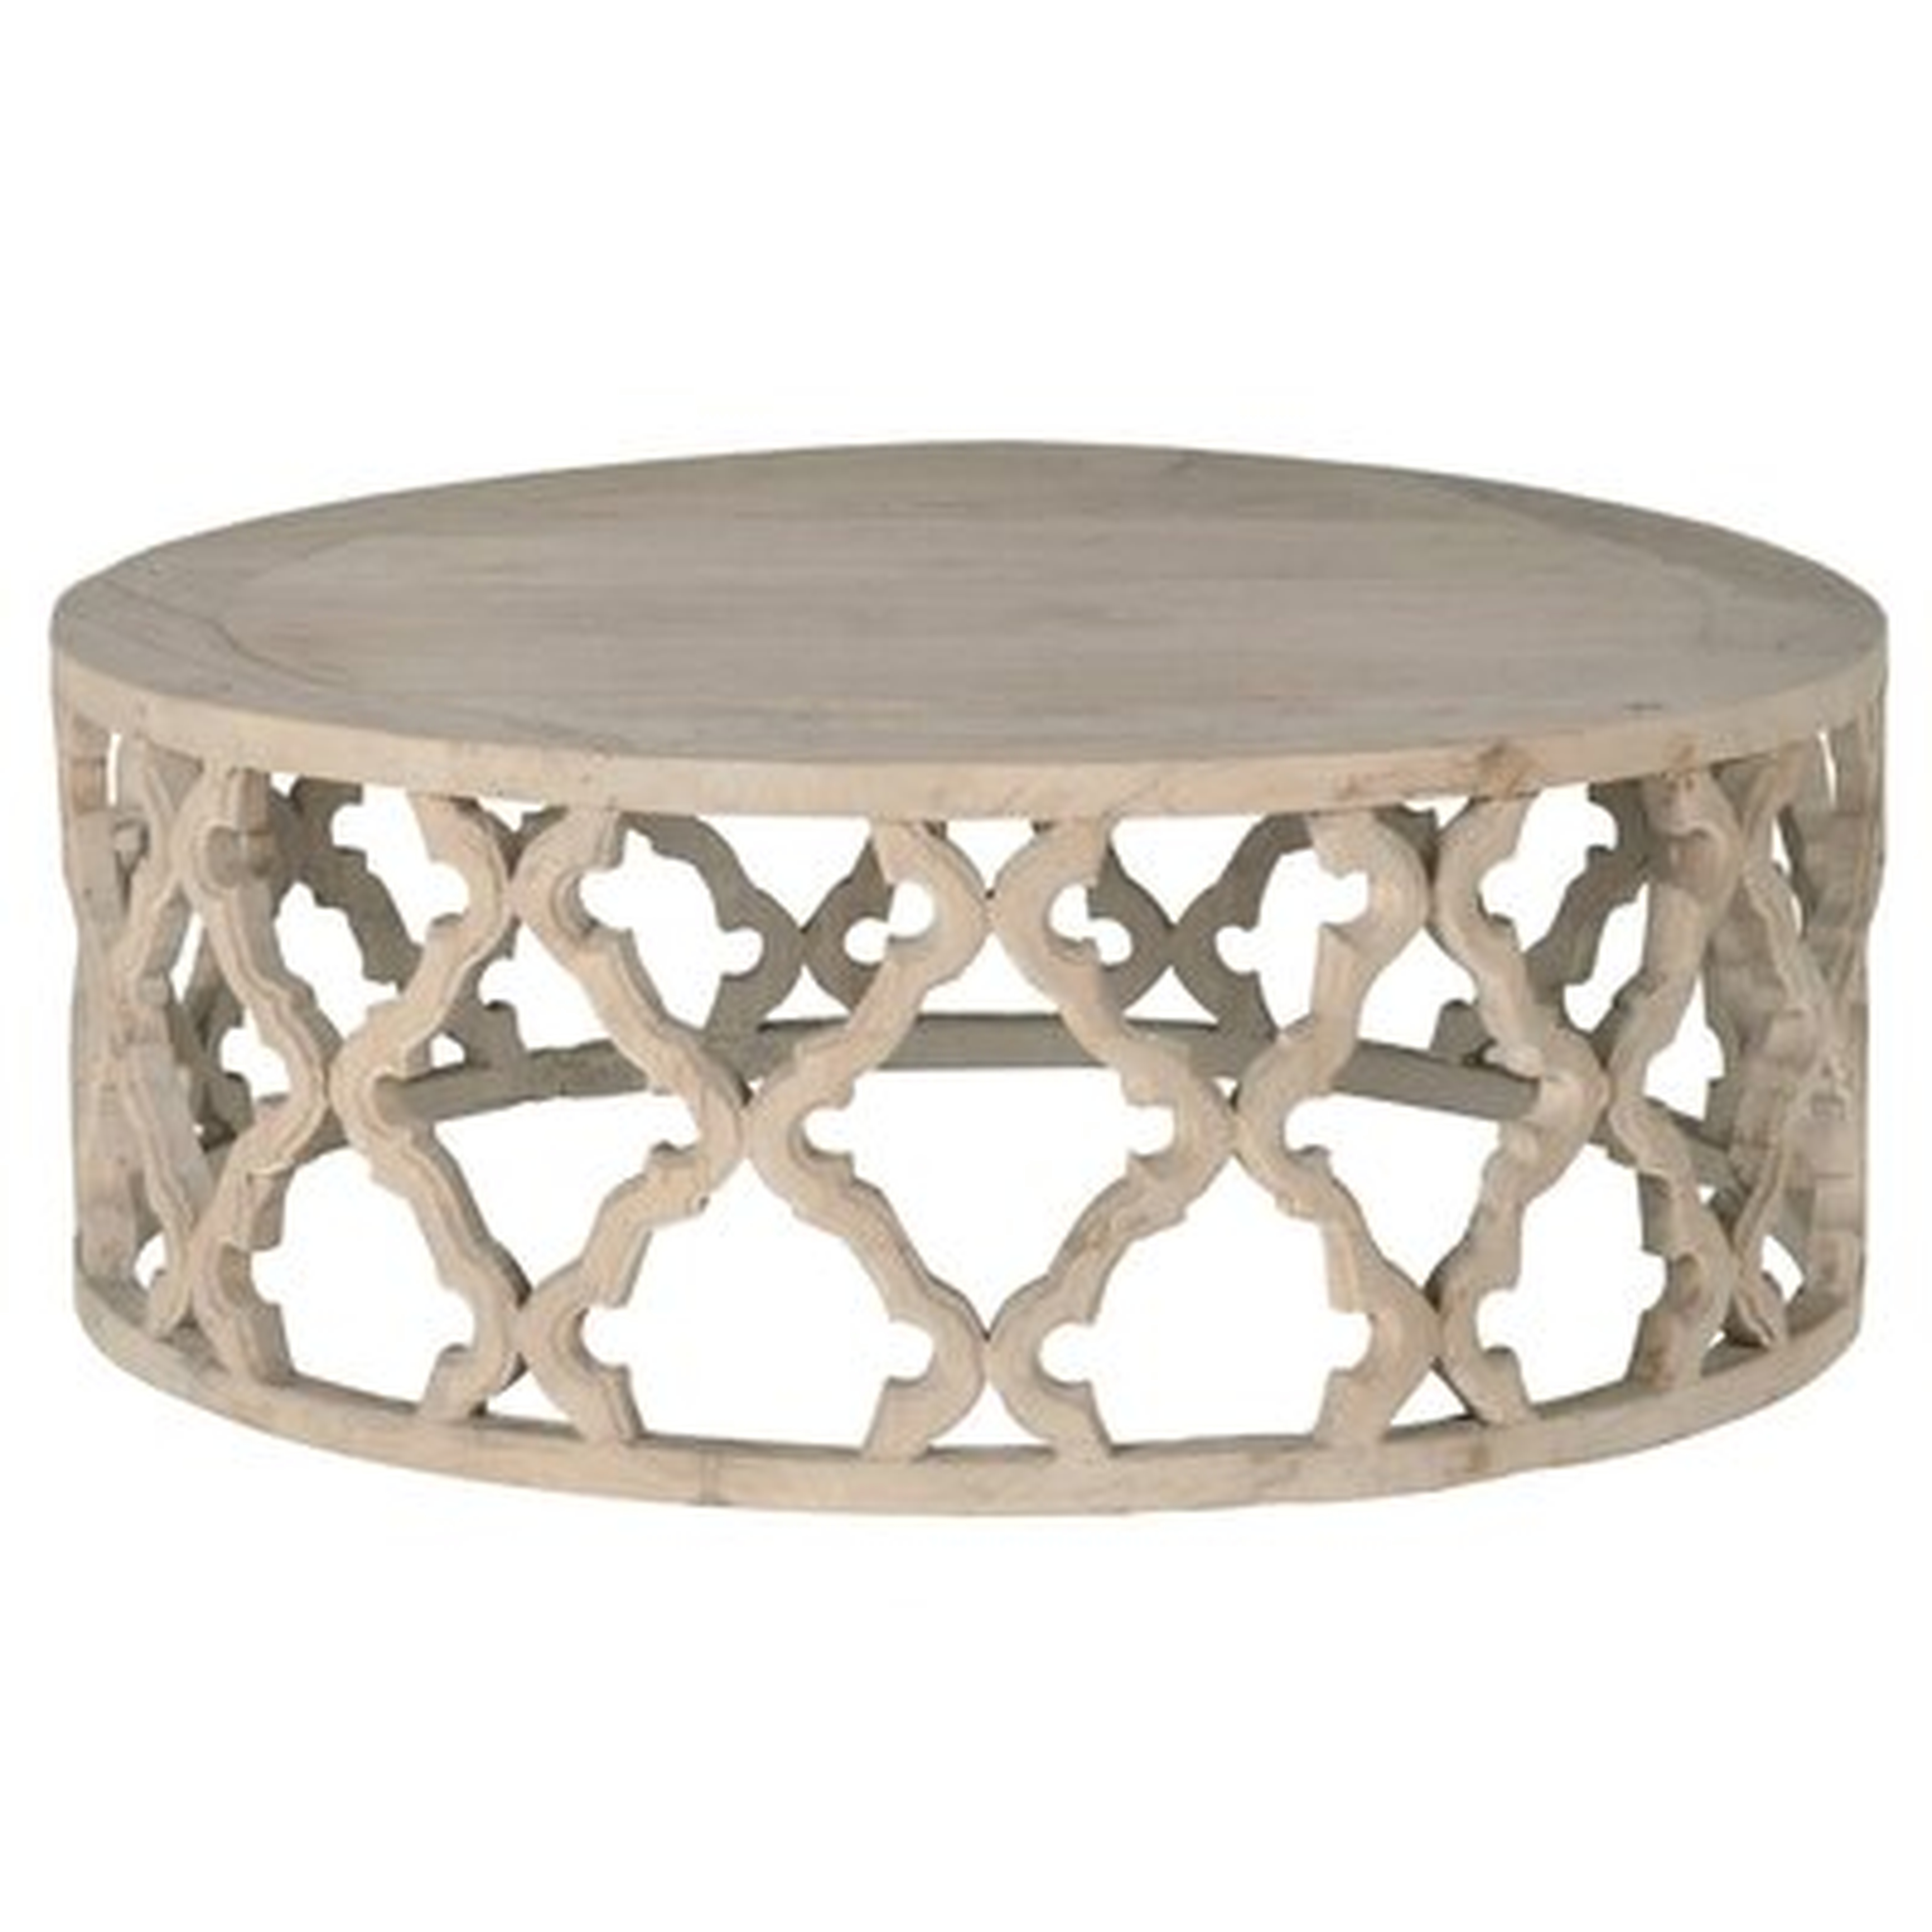 Crissay Coffee Table with Tray Top - Birch Lane